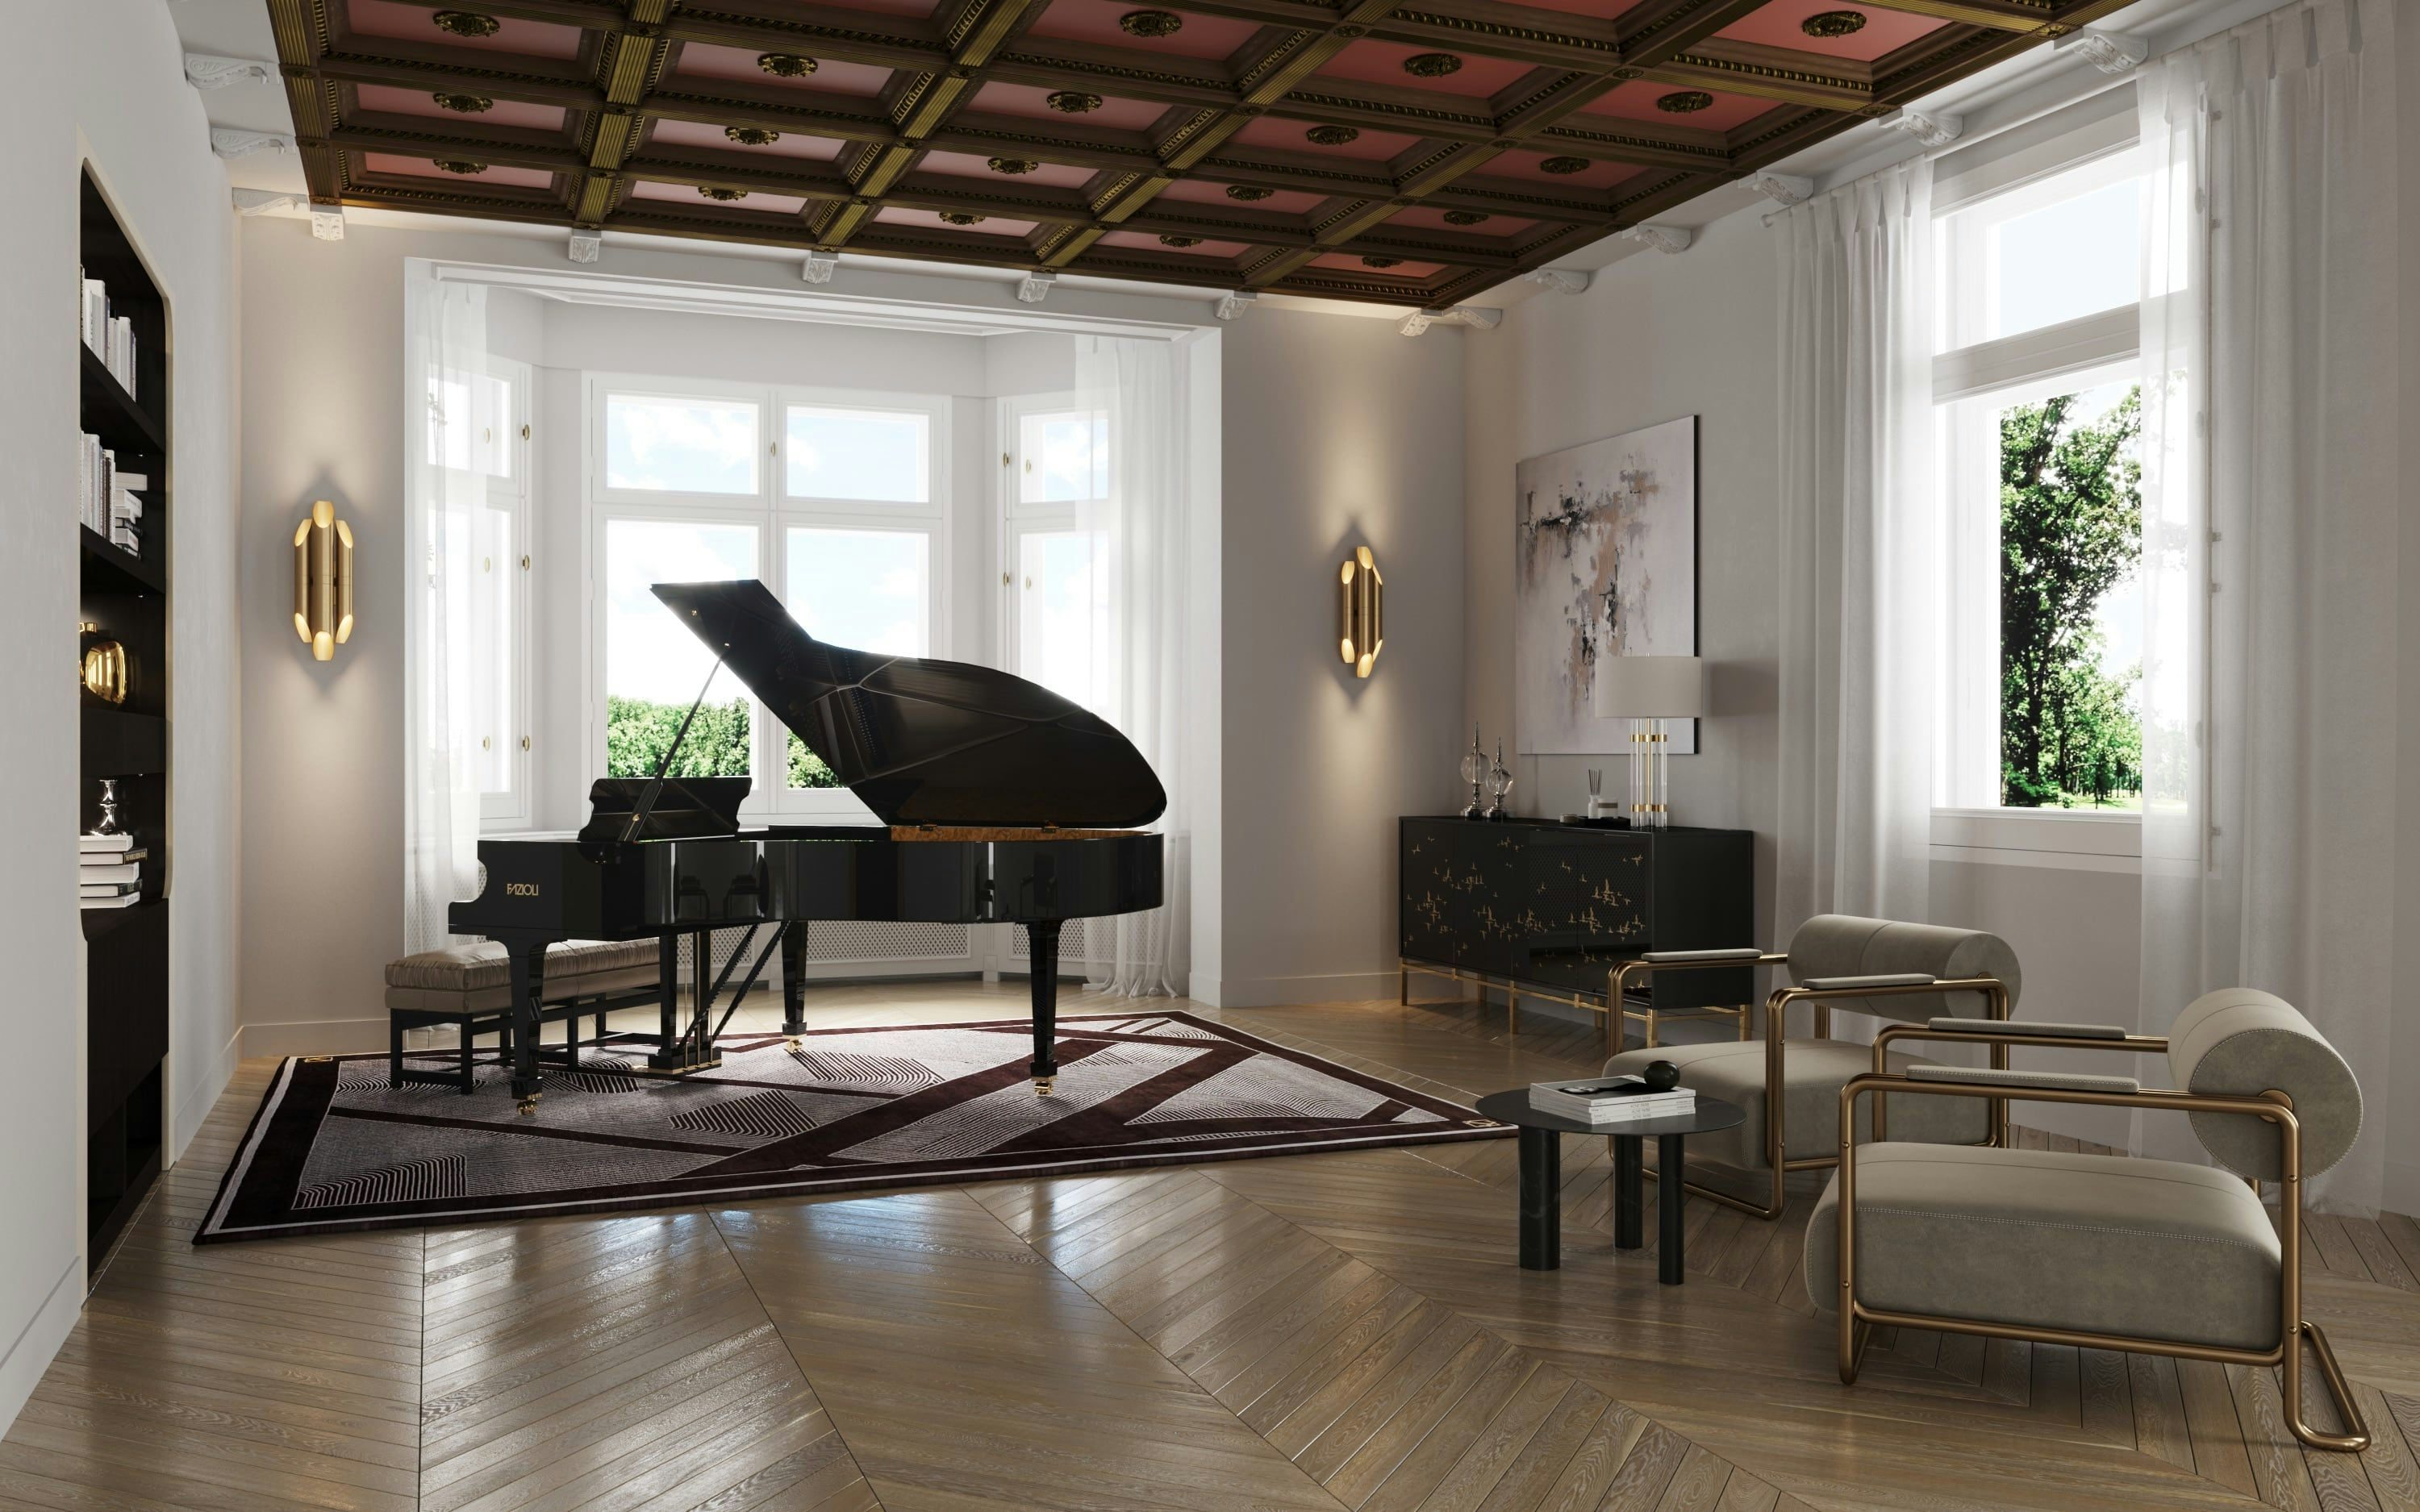 3D Interior Visualization of leisure space in renovated old built villa in Berlin Wannsee, Germany